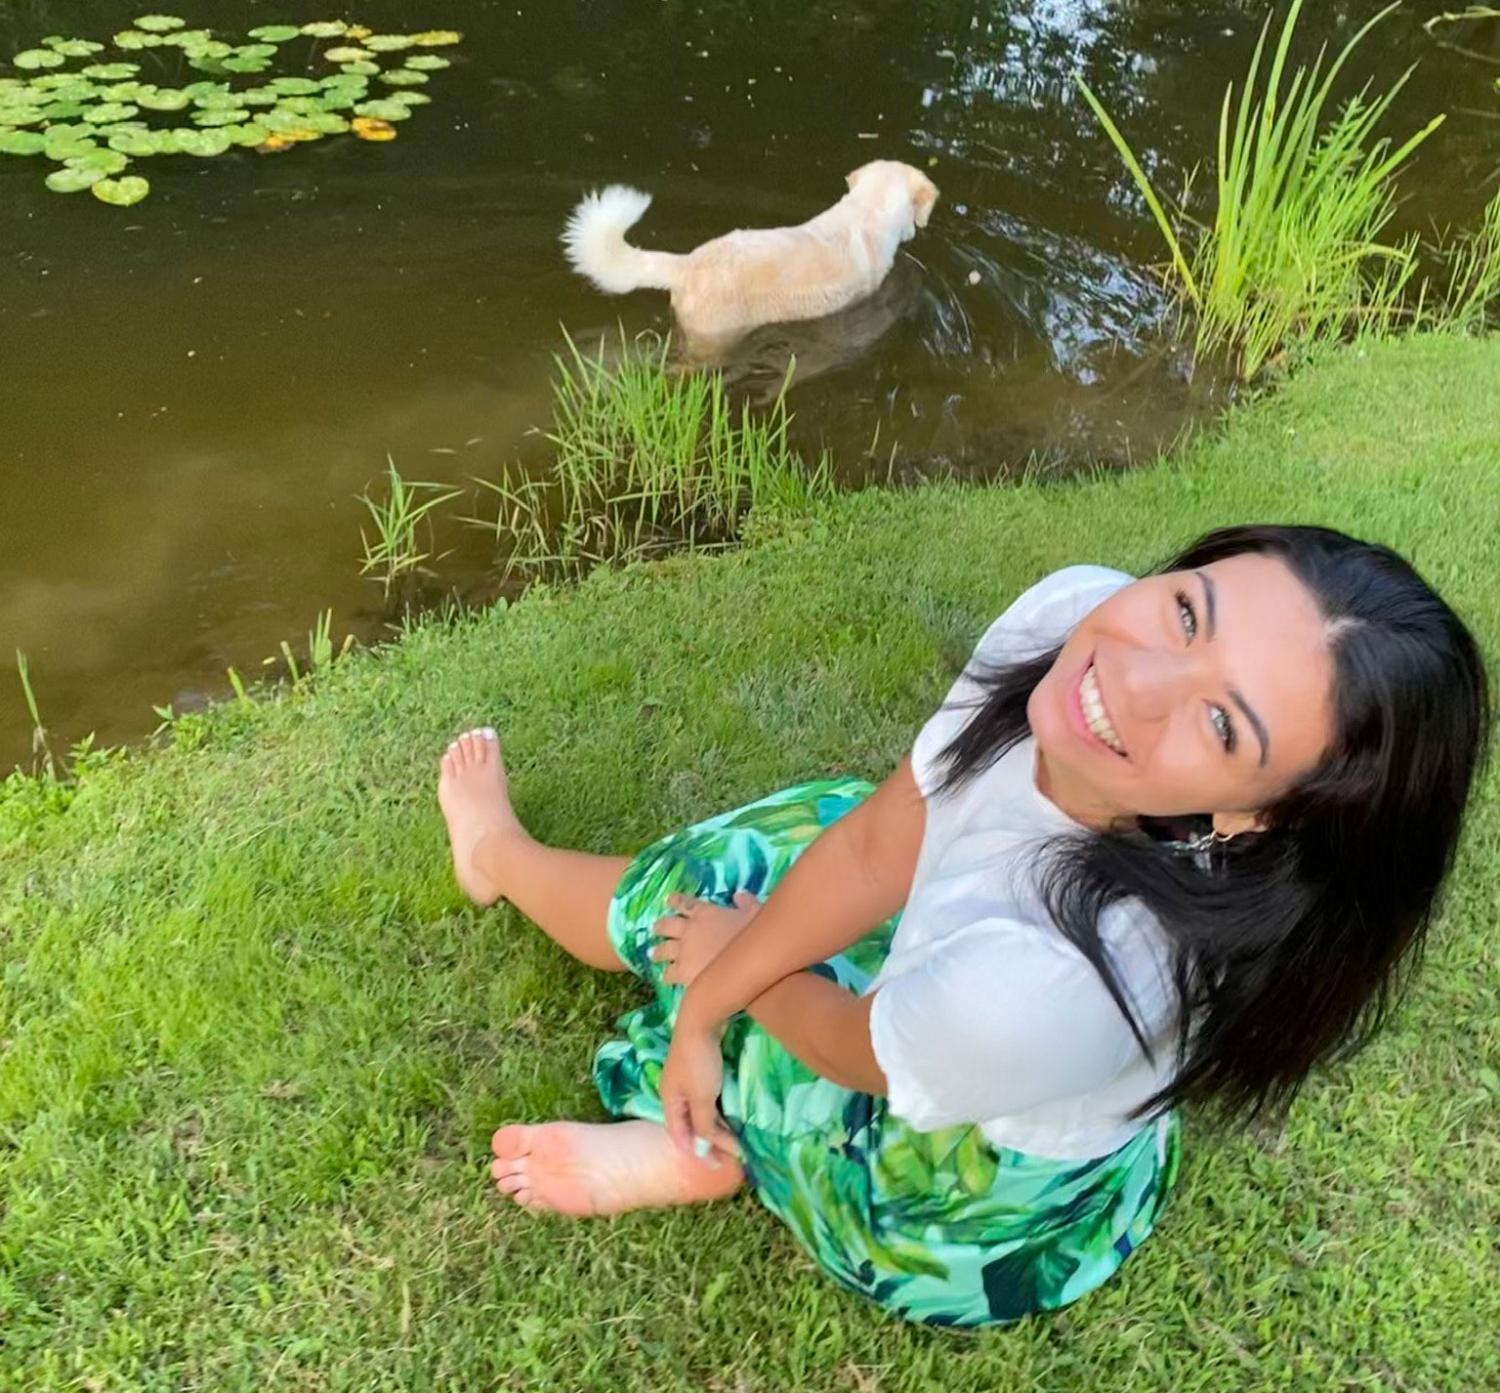 Tia Kennedy with her dog wading in pond